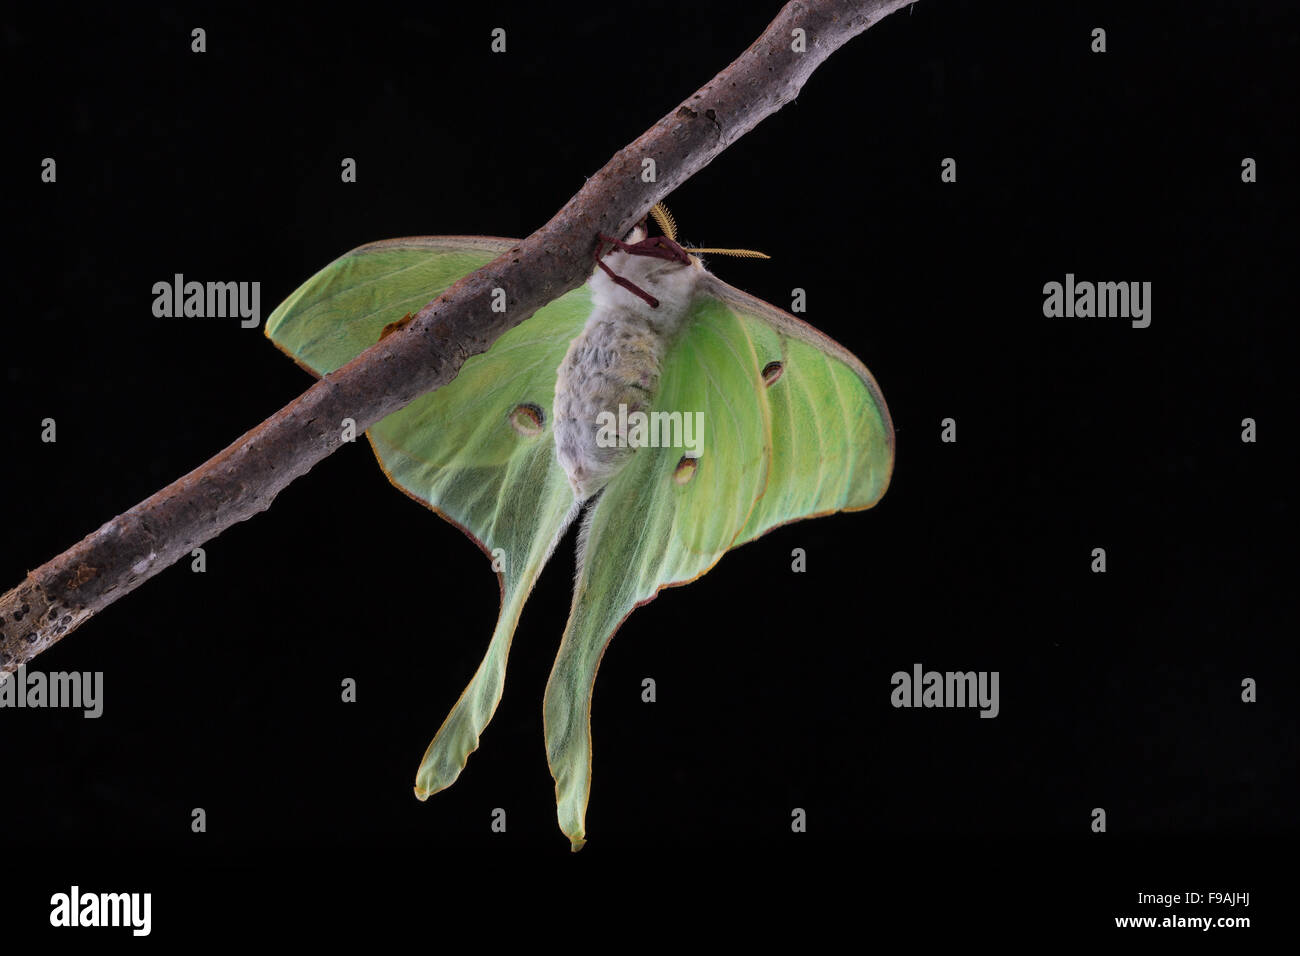 A freshly emerged Luna Moth, Actias luna, clinging to a branch Stock Photo